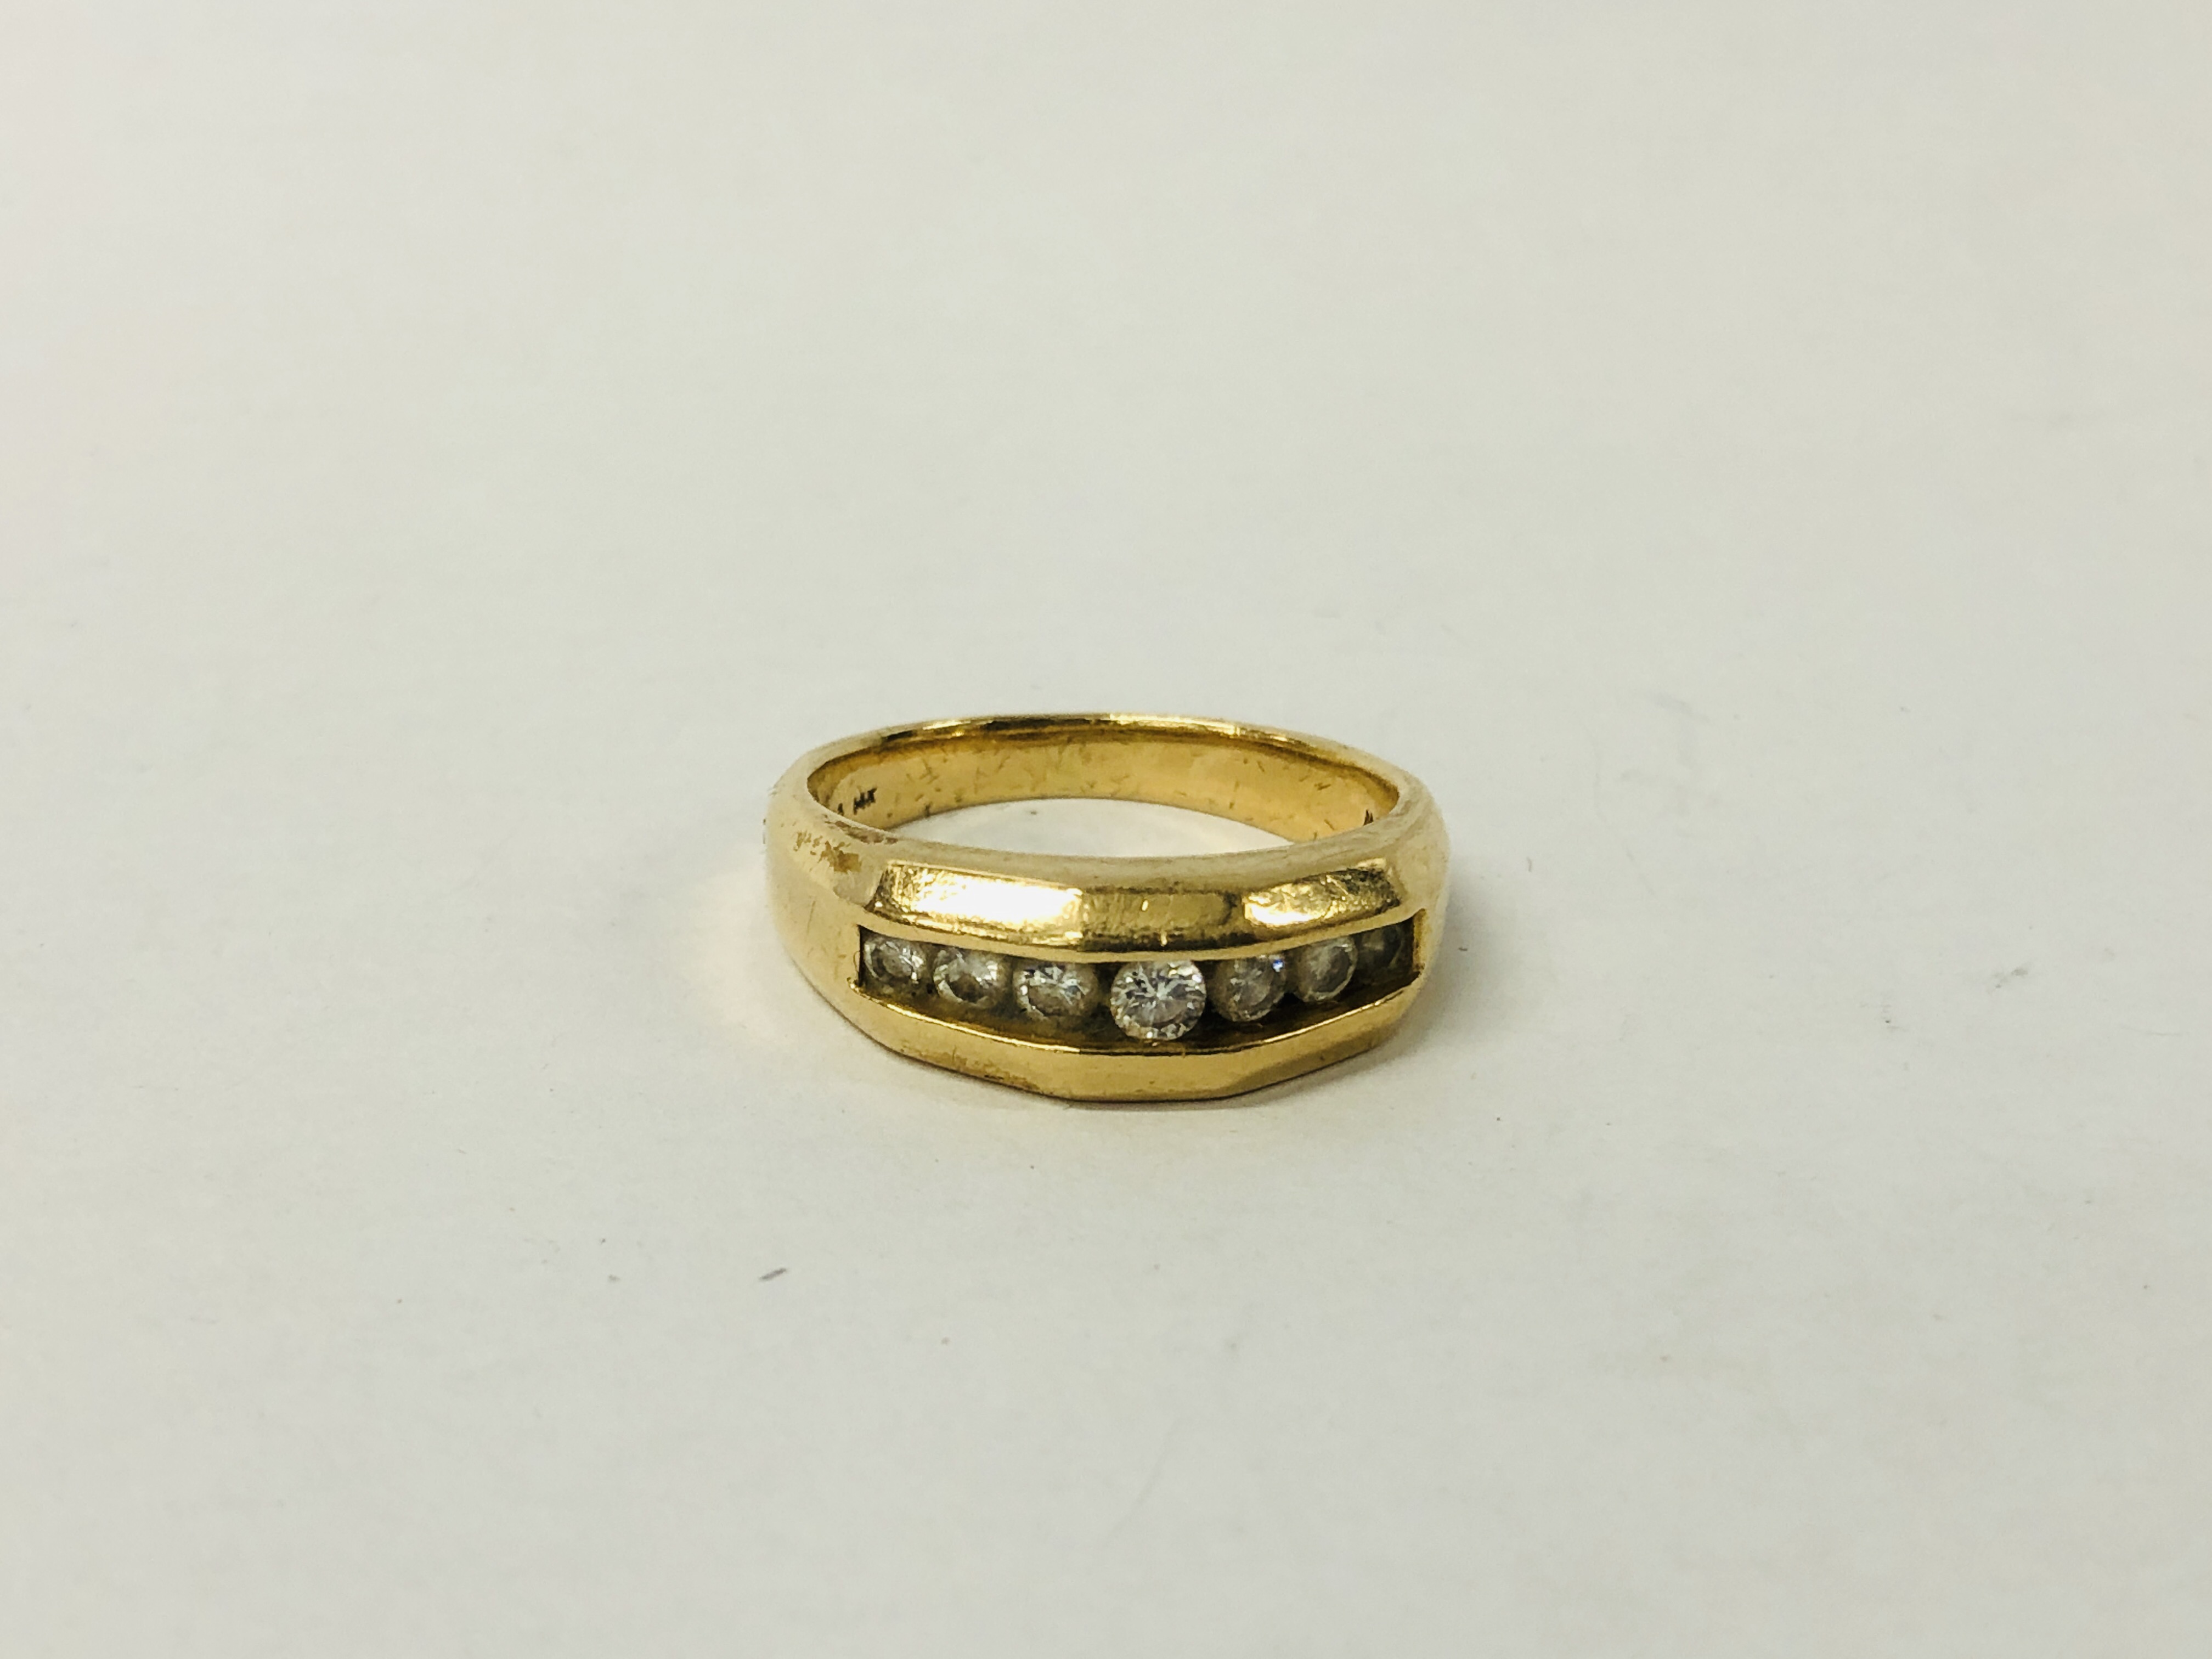 SEVEN STONE DIAMOND RING IN A 14K GOLD SETTING